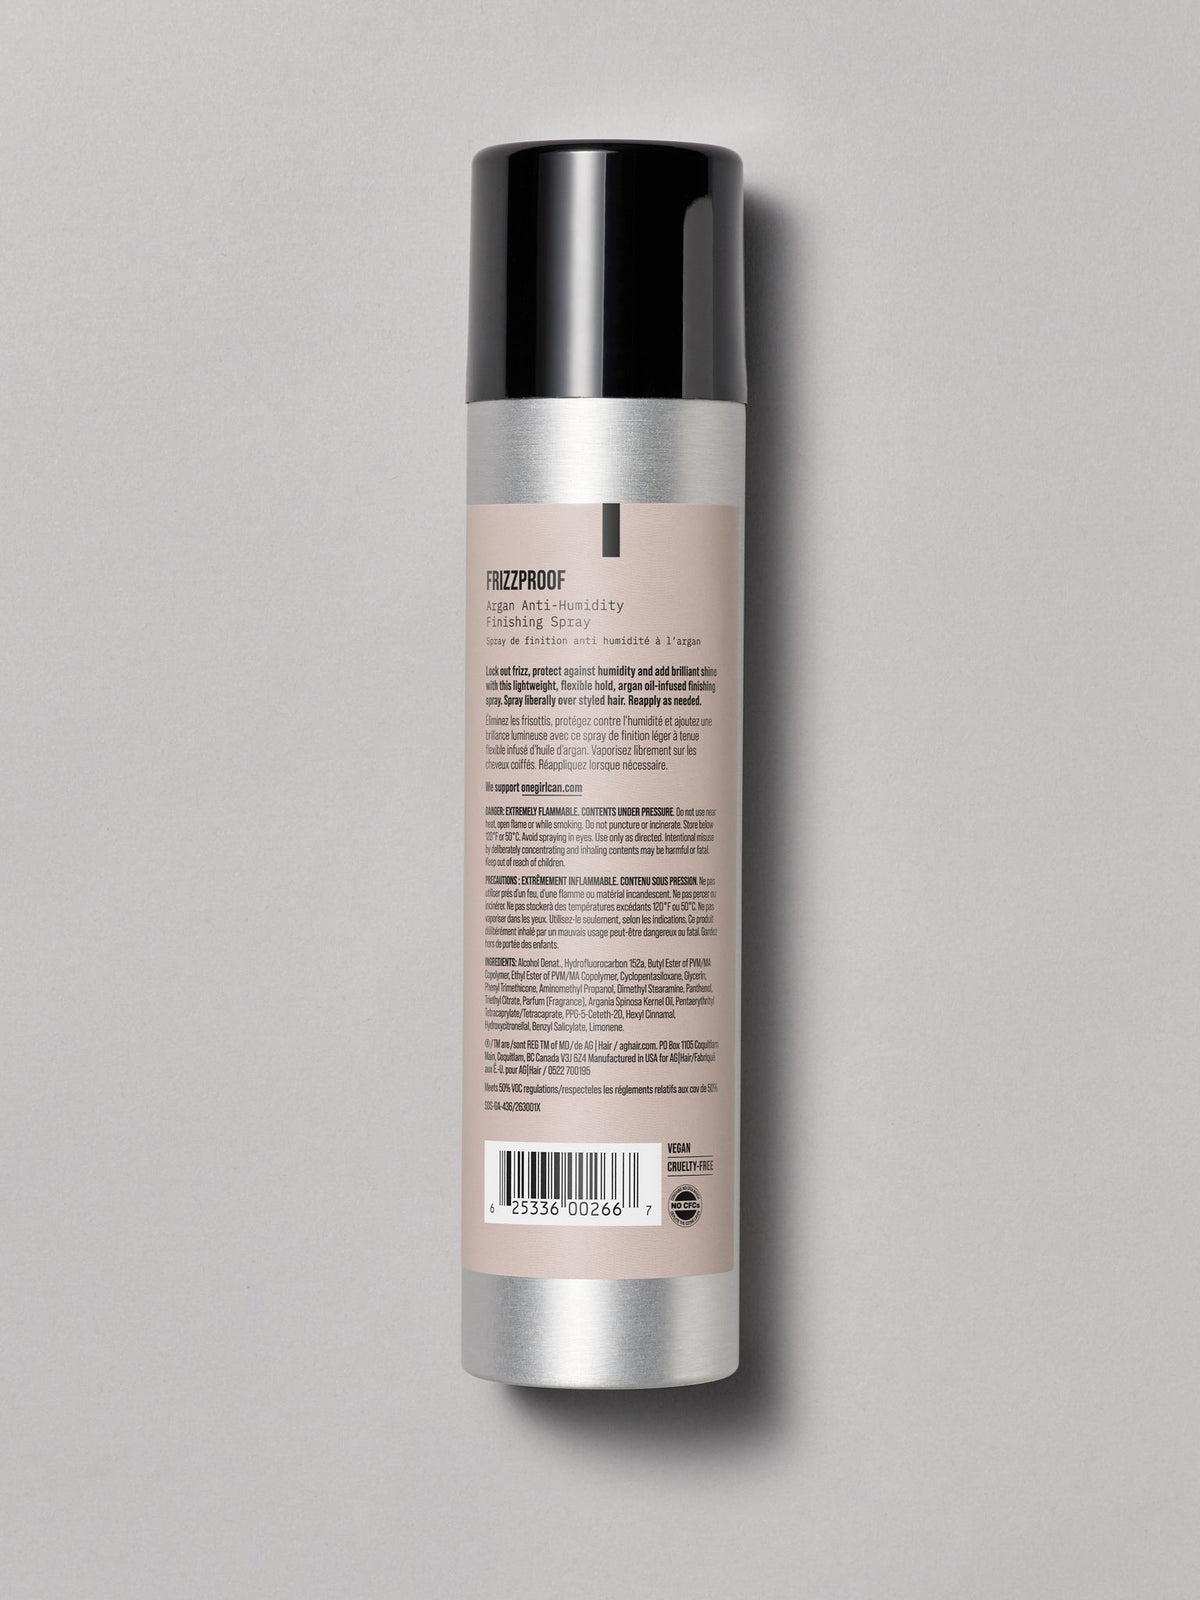 FRIZZPROOF Argan Anti-Humidity Finishing Spray - by AG Hair |ProCare Outlet|